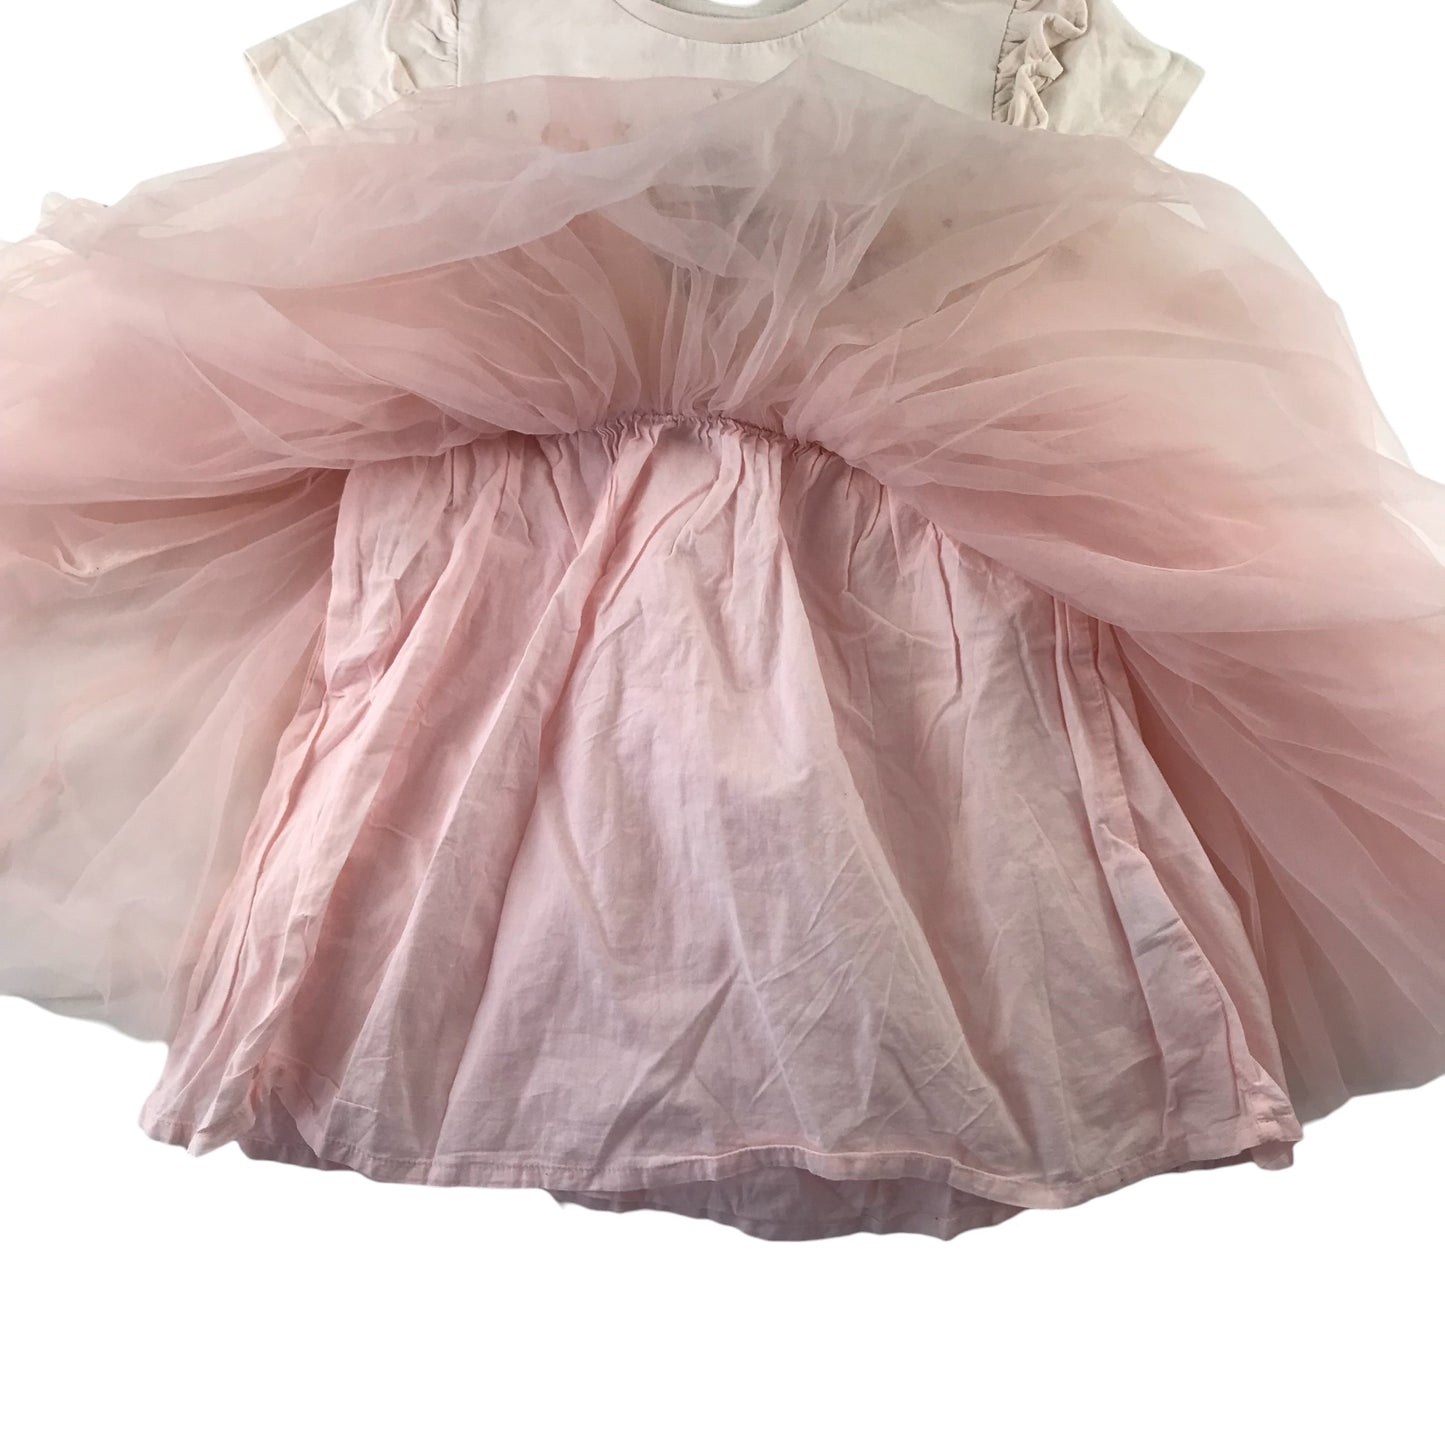 Next dress 6-7 years white and pink ballerina characters tulle skirt